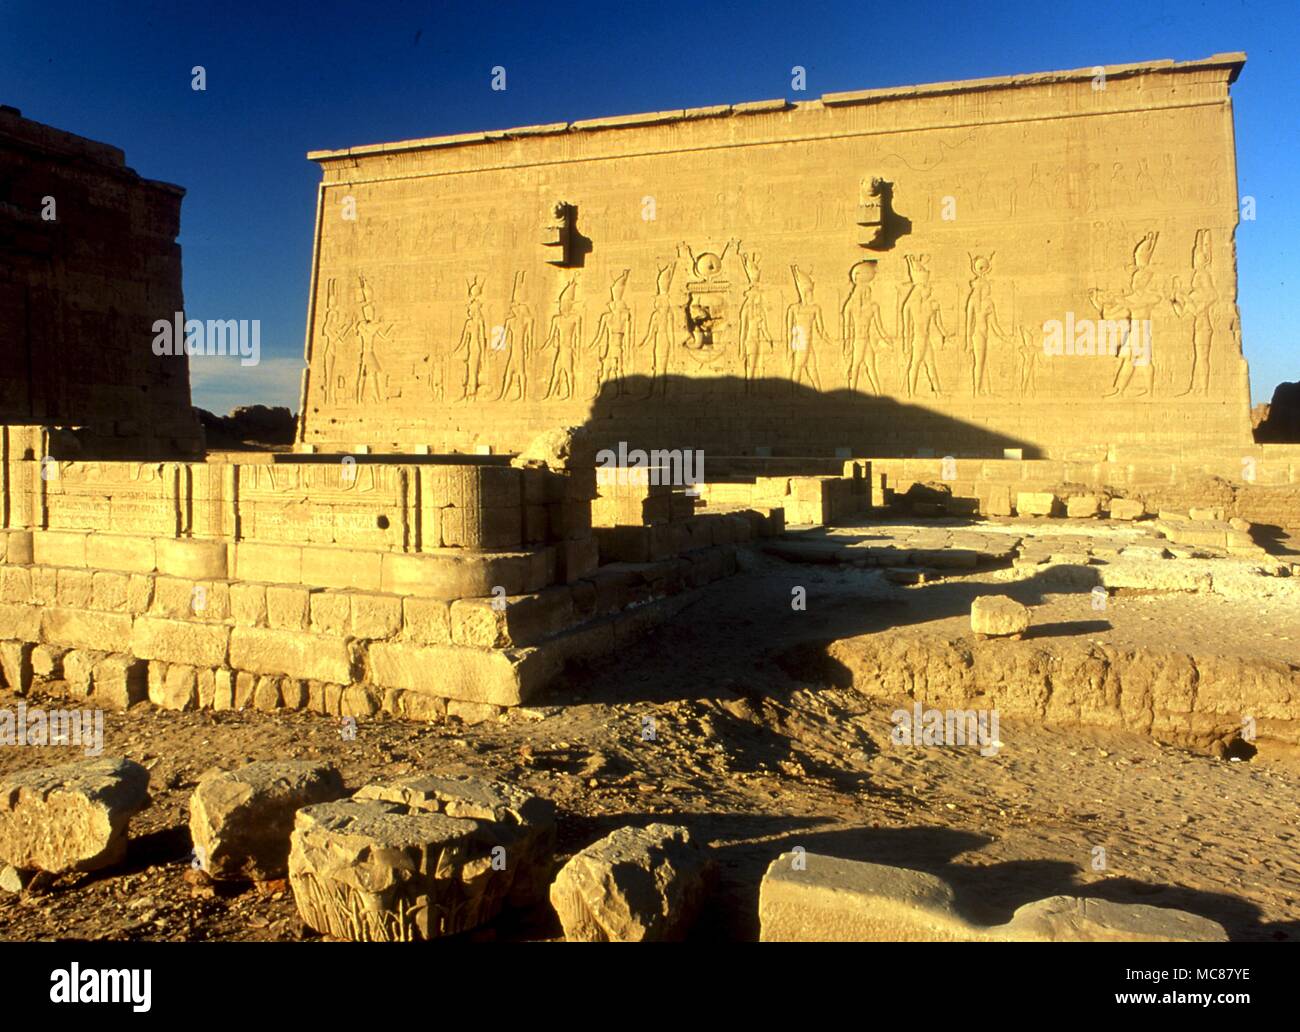 Egyptian astrology. Denderah. The Temple of Hathor Denderah which contains a multitude of astrological planetary and zodiacal symbols Stock Photo